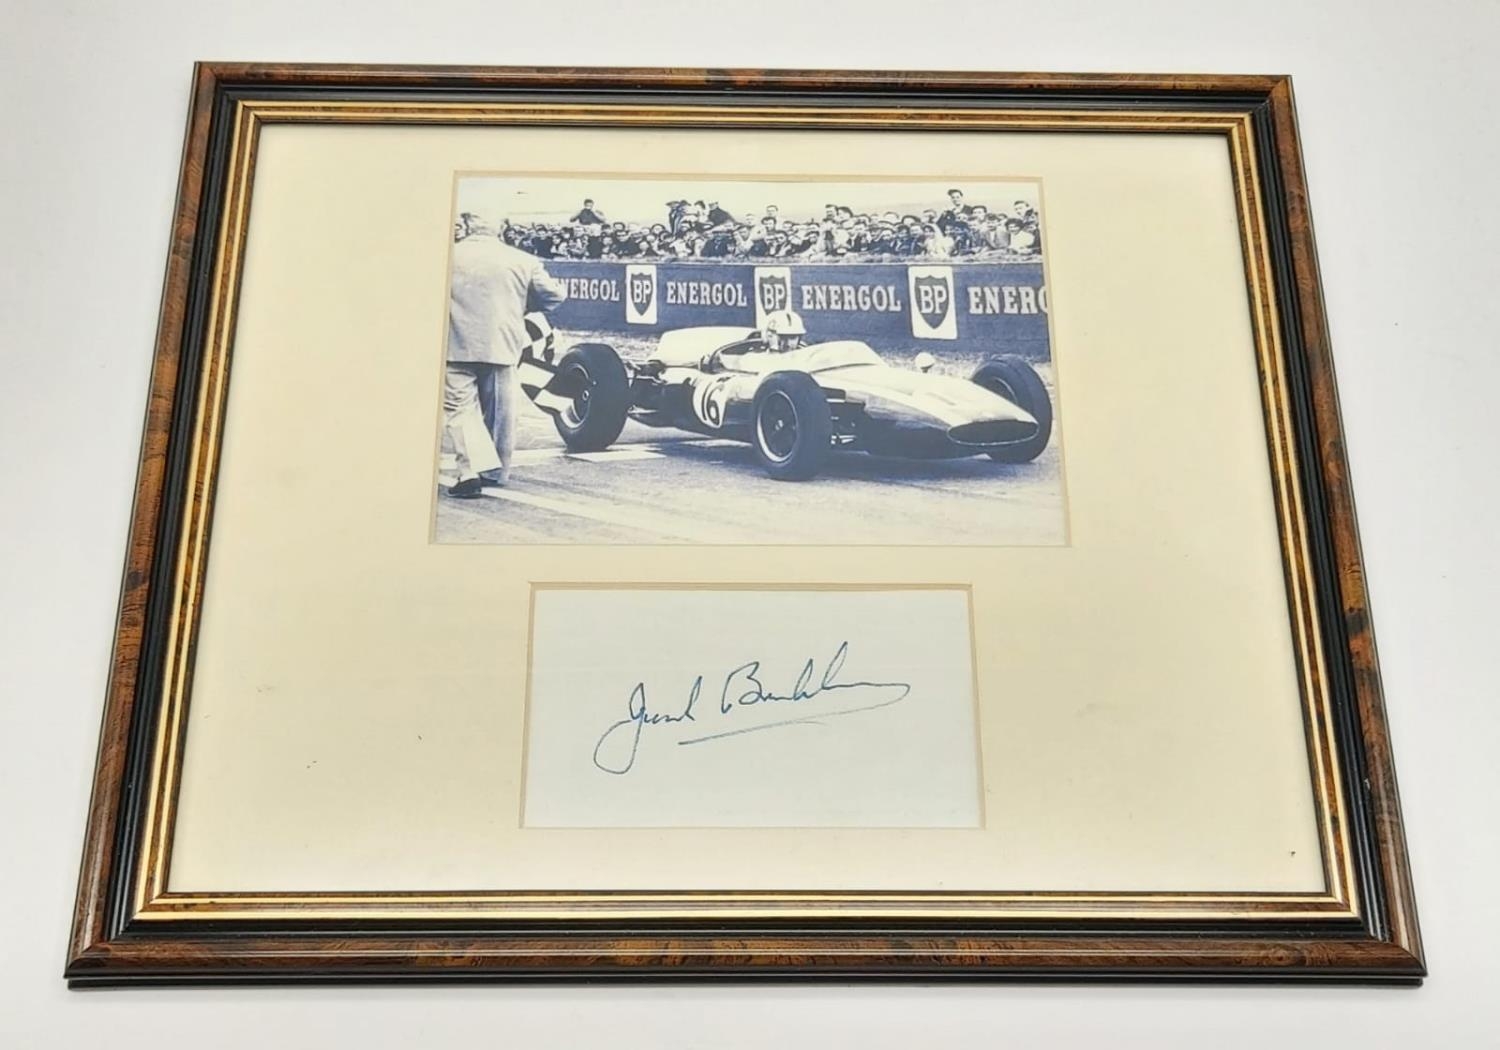 Three Time Formula 1 Champion Jack Brabham Autograph and Picture Piece. In frame - 34 x 29cm.